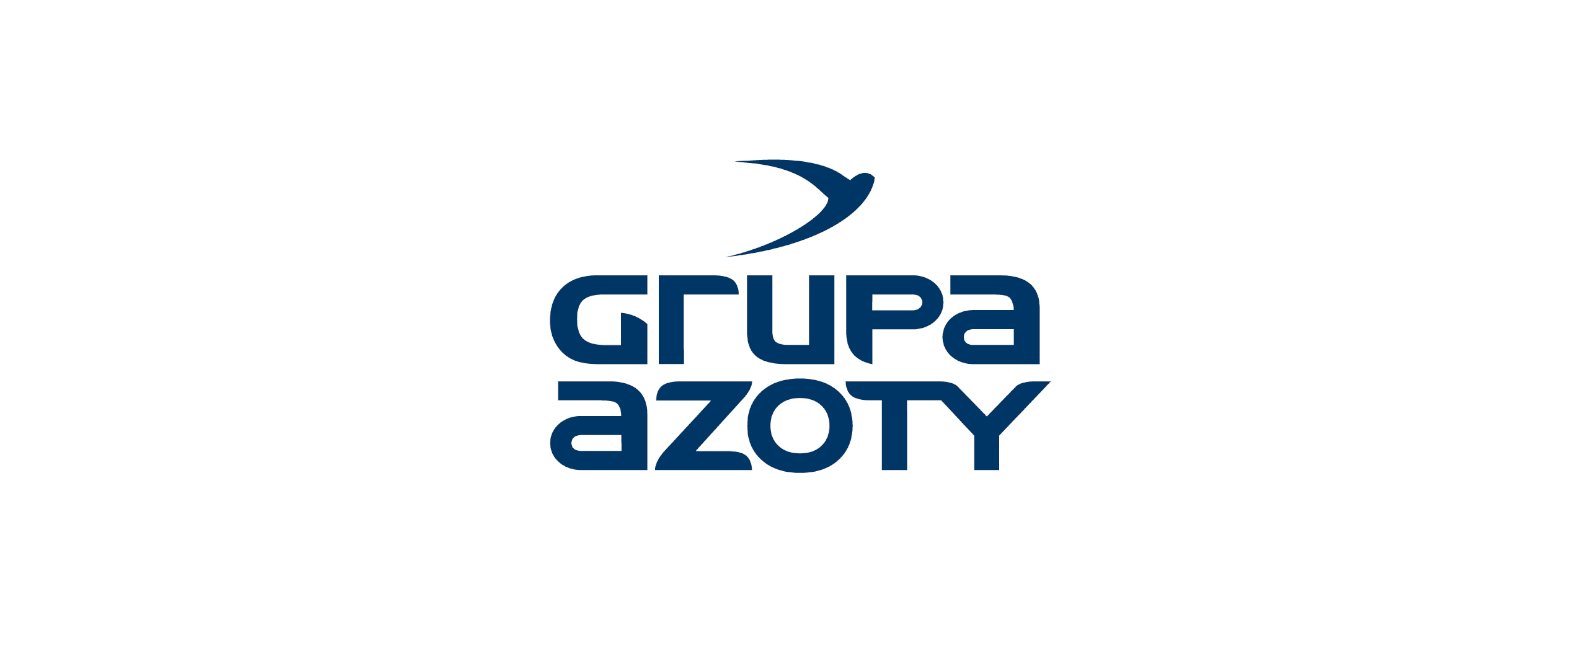 Grupa Azoty provides supplies of CO2 and dry ice to its customers